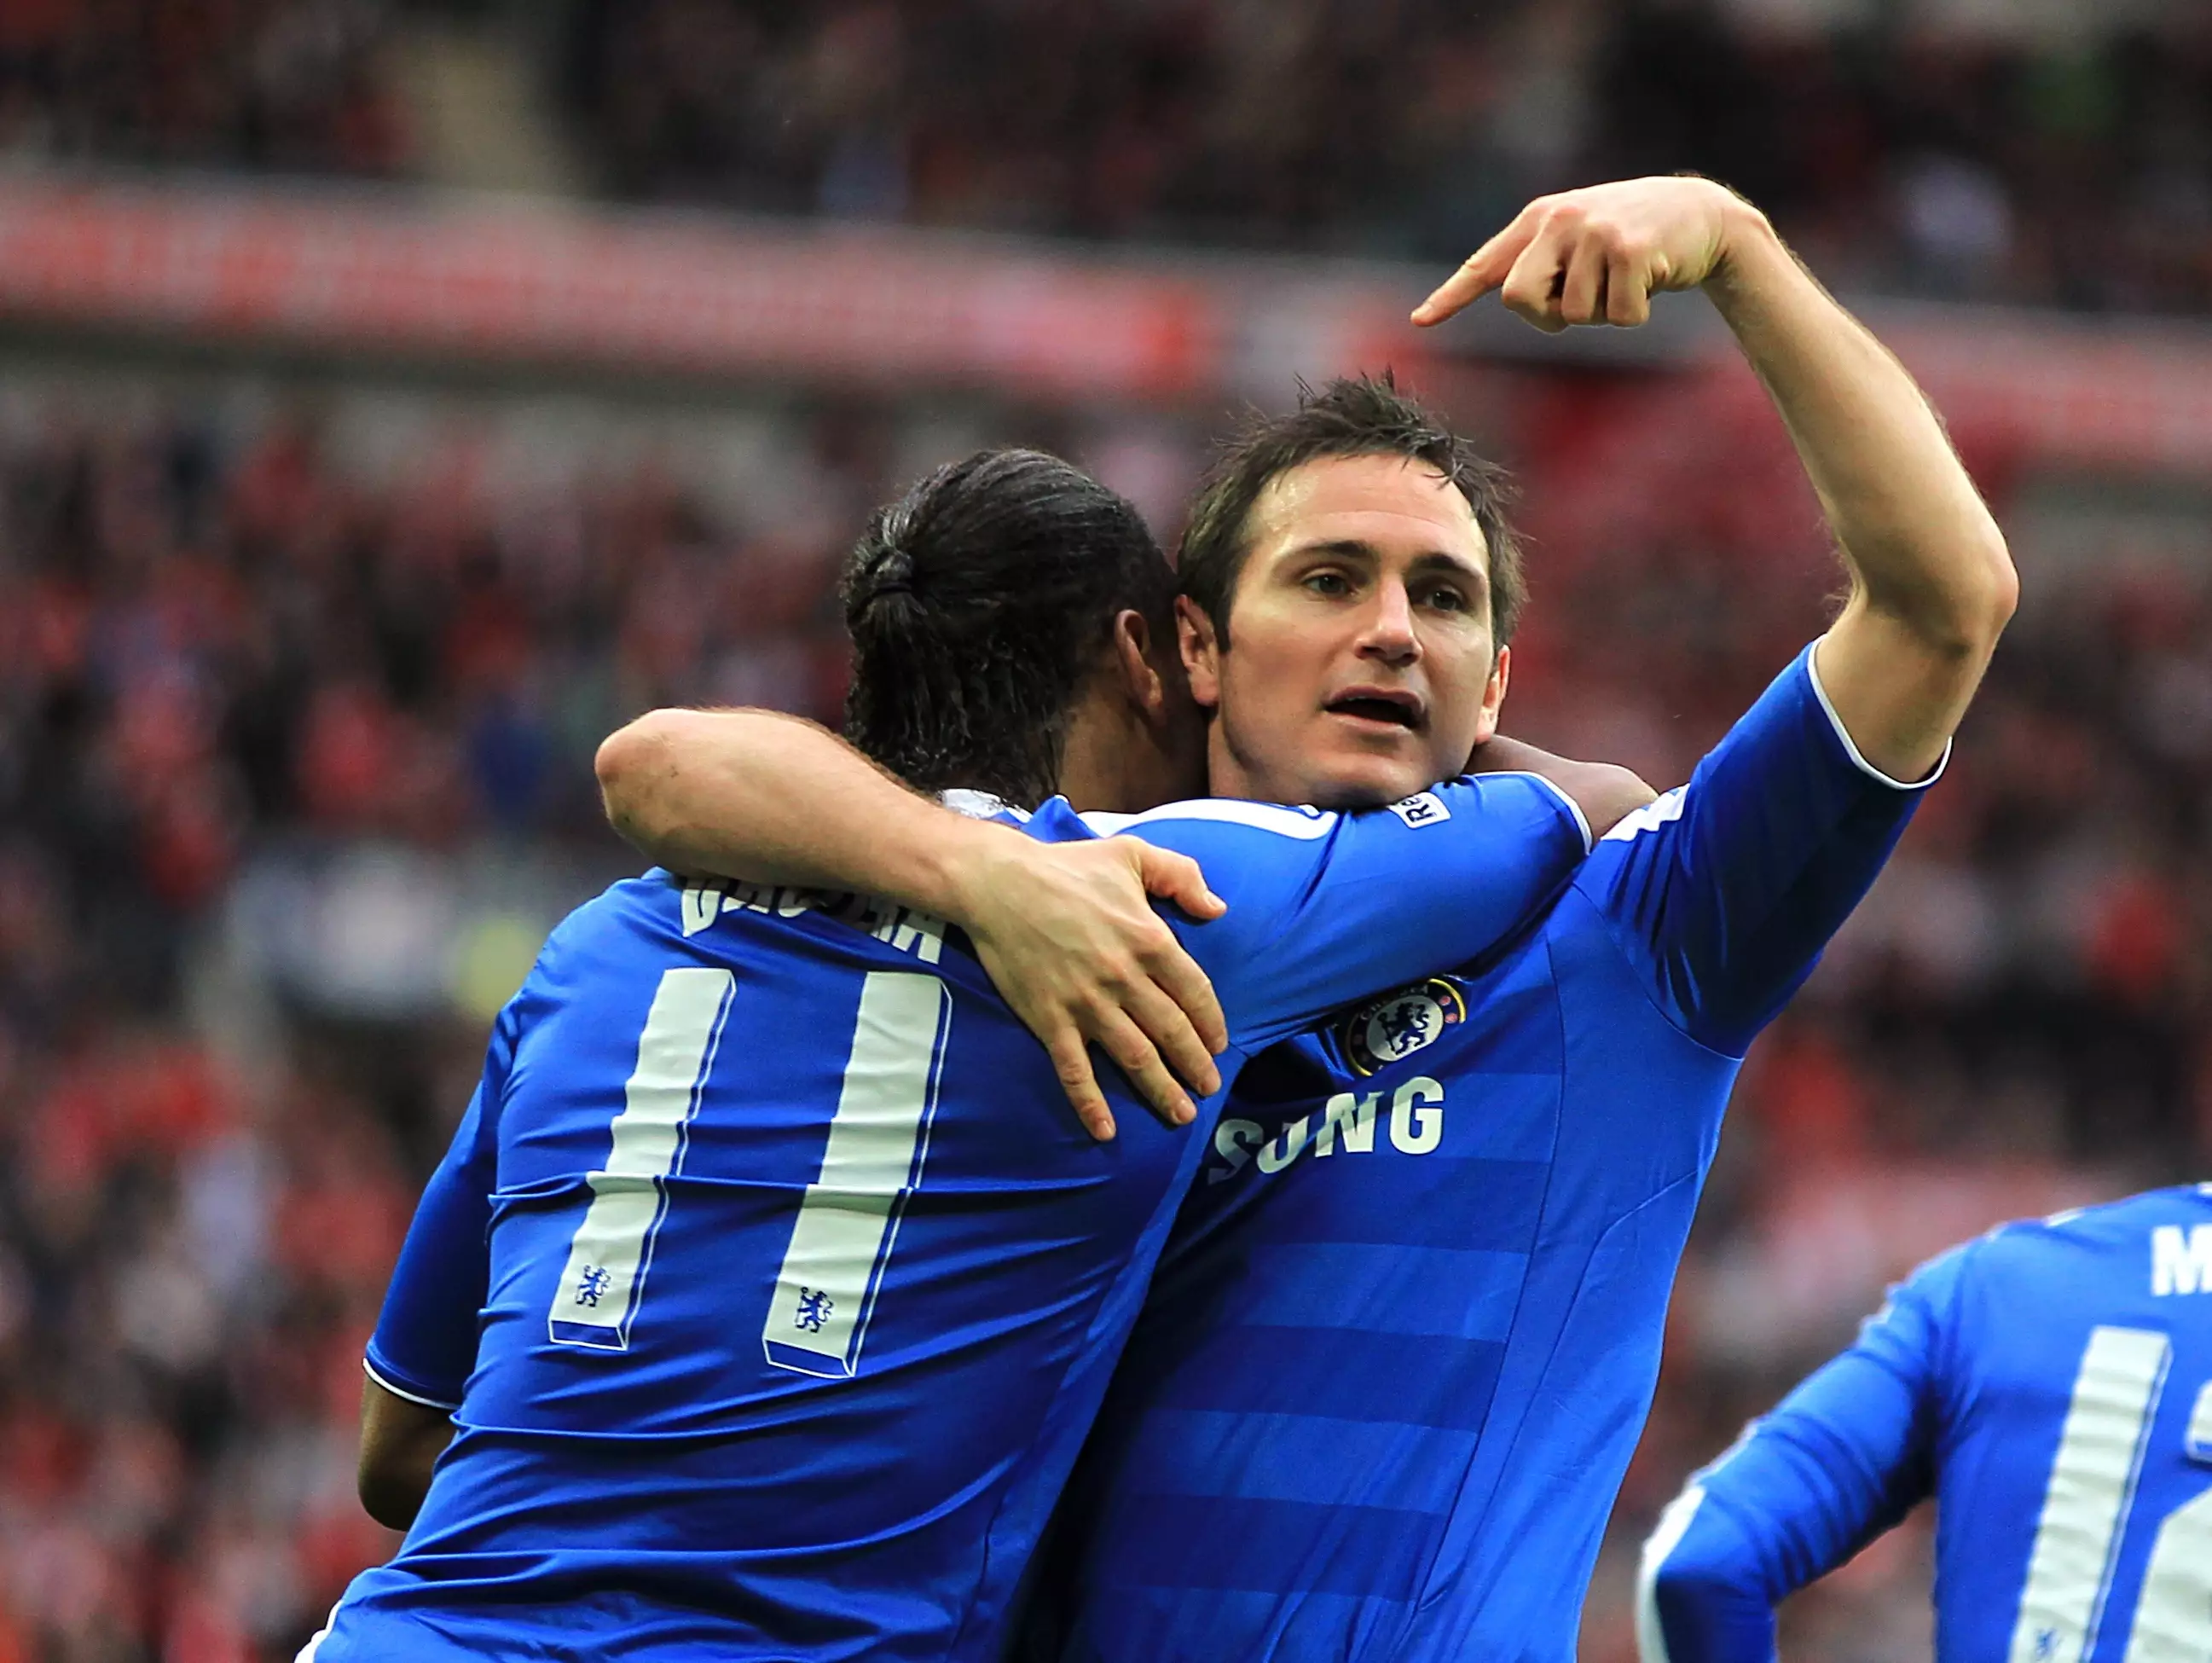 Lampard and Drogba were magic together. Image: PA Images